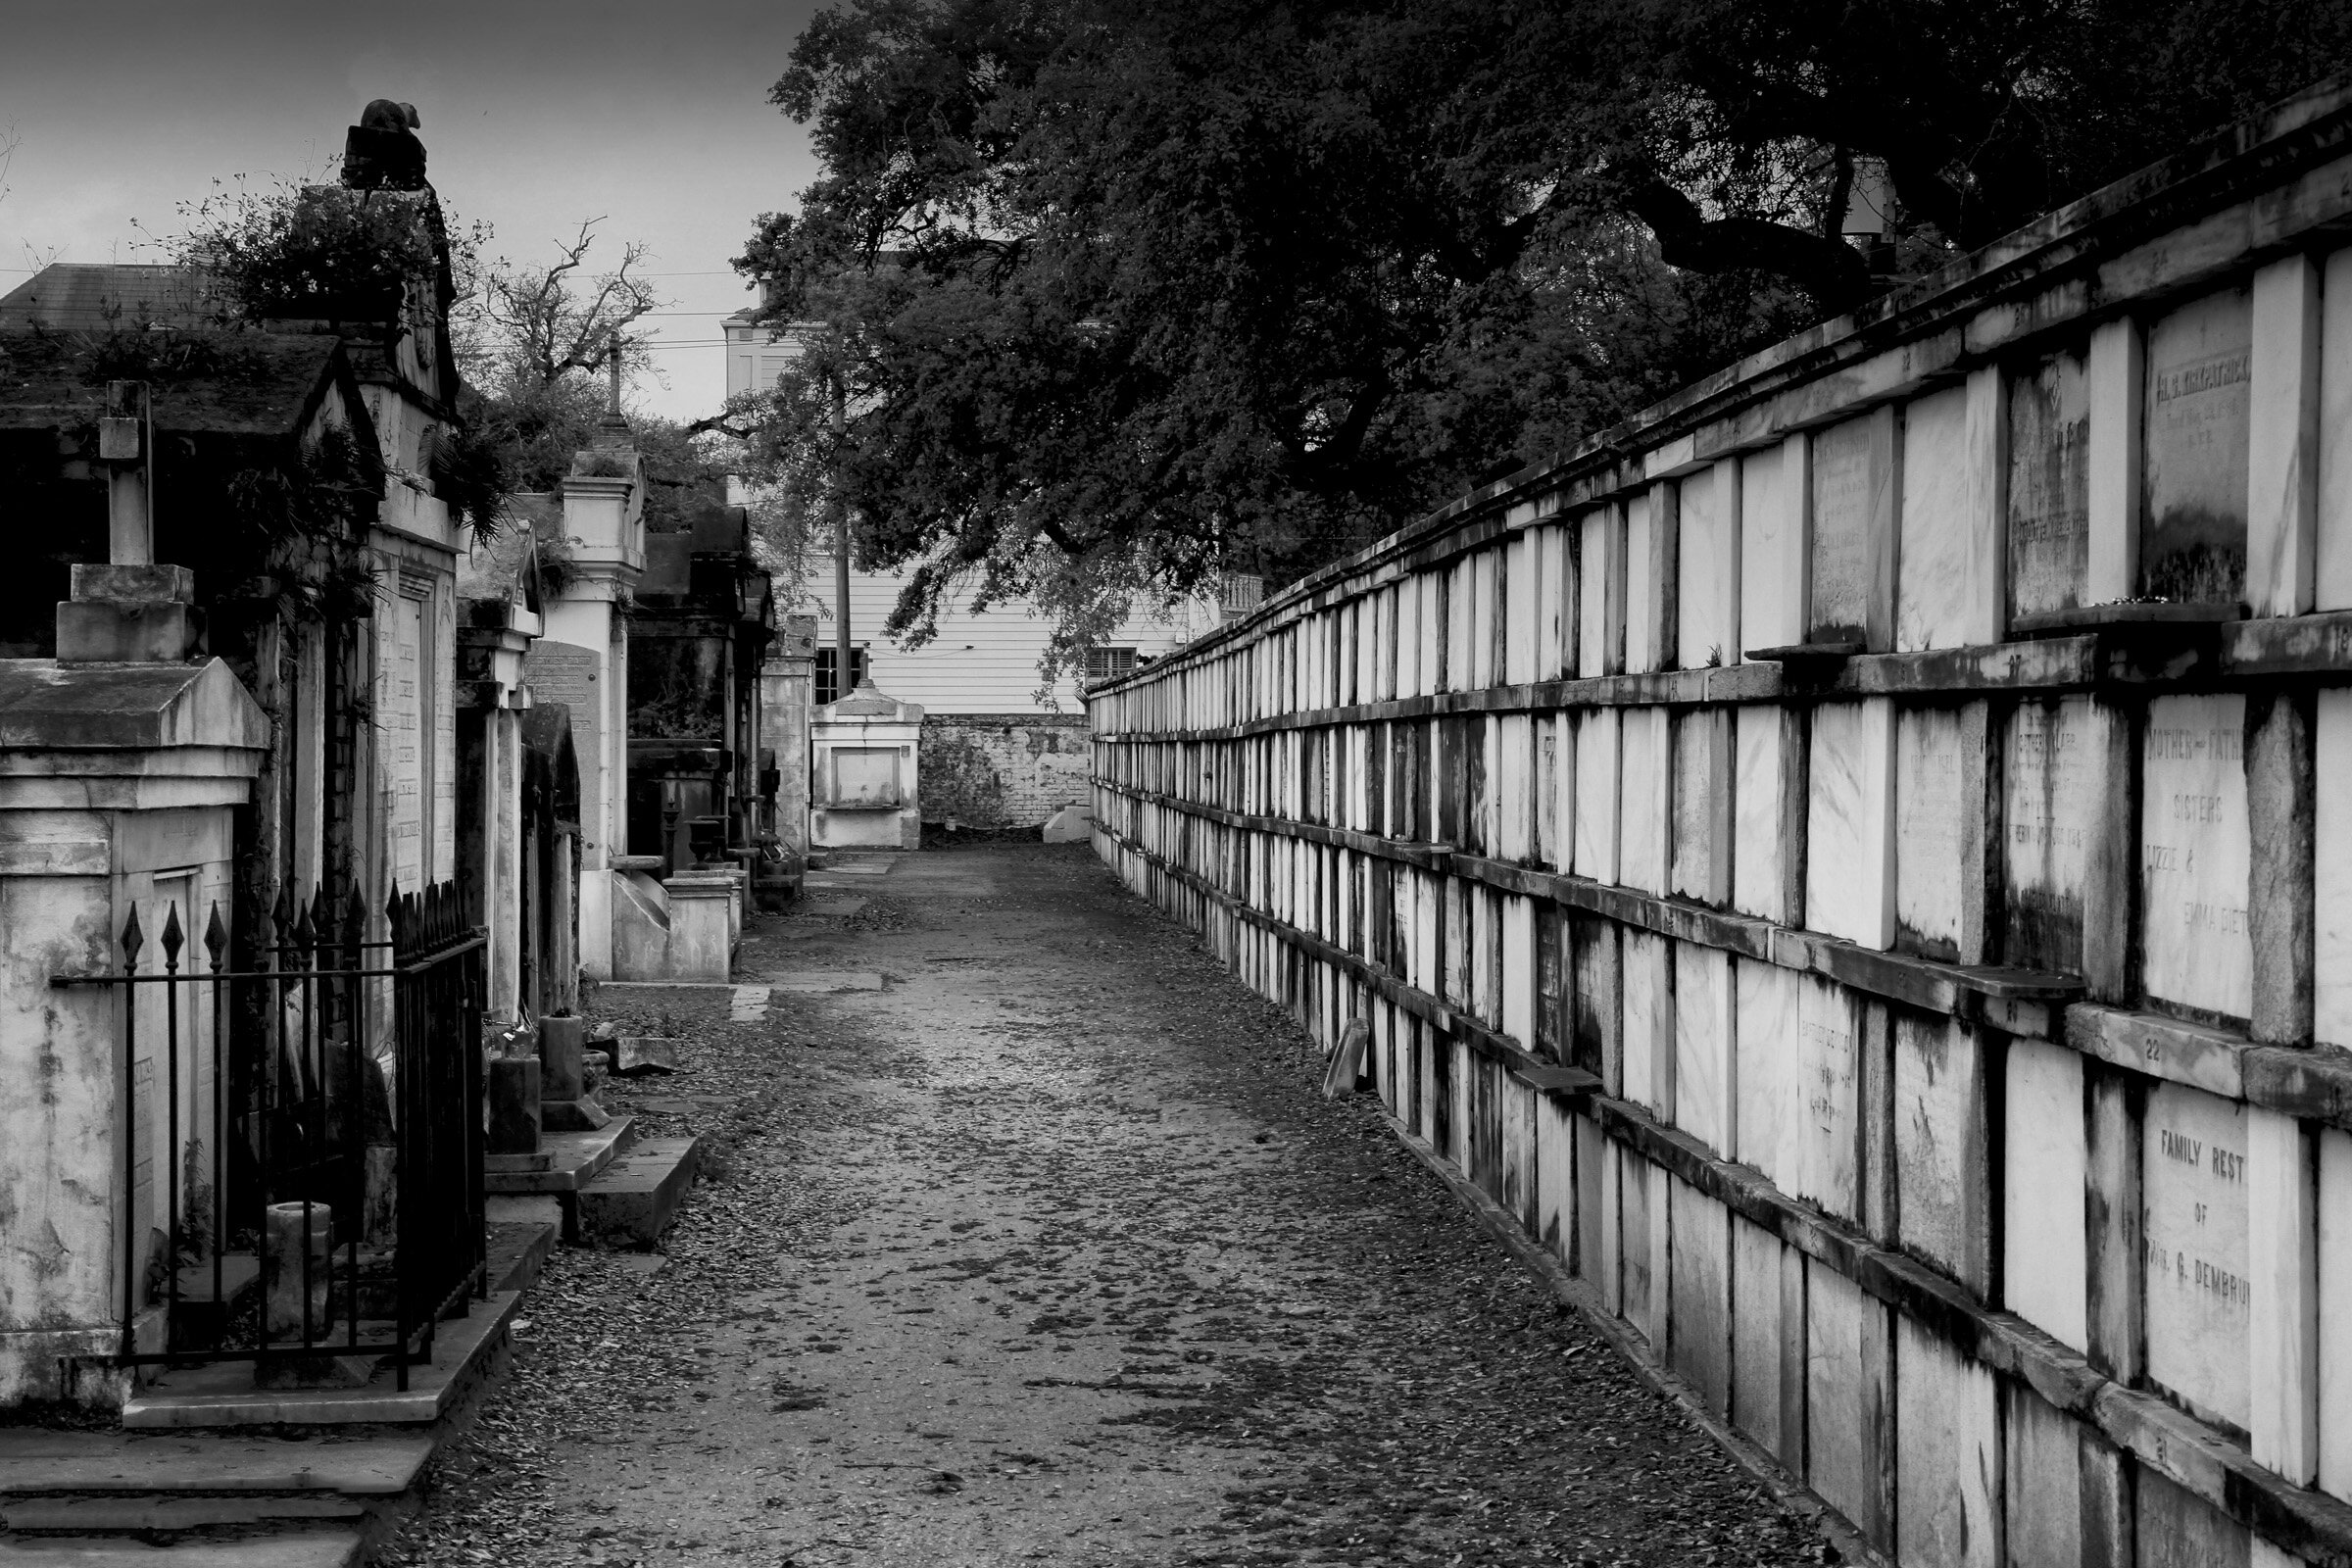  Lafayette Cemetery, New Orleans   